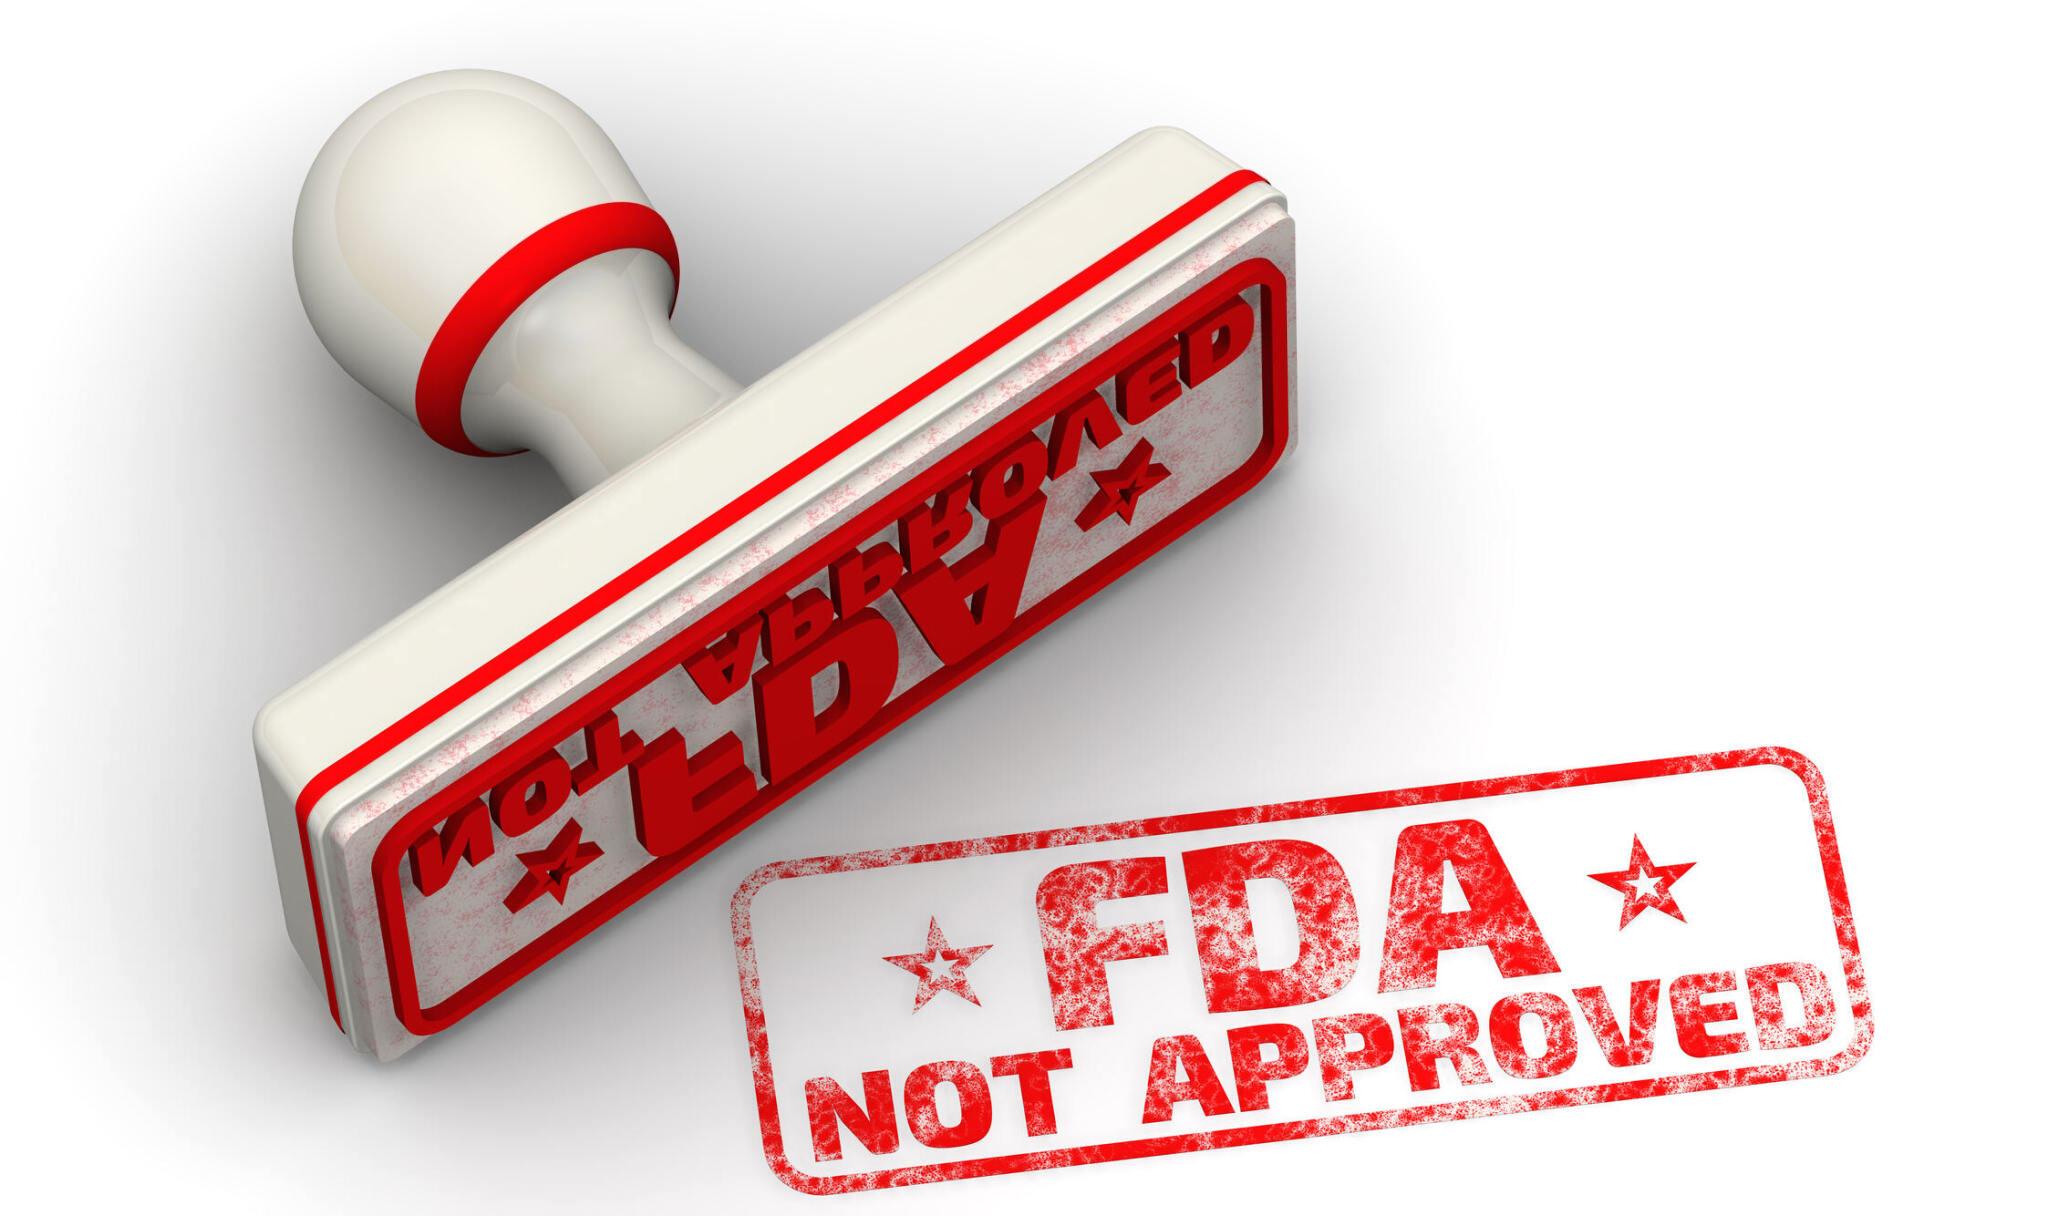 FDA's Role in Approving Medical Treatments